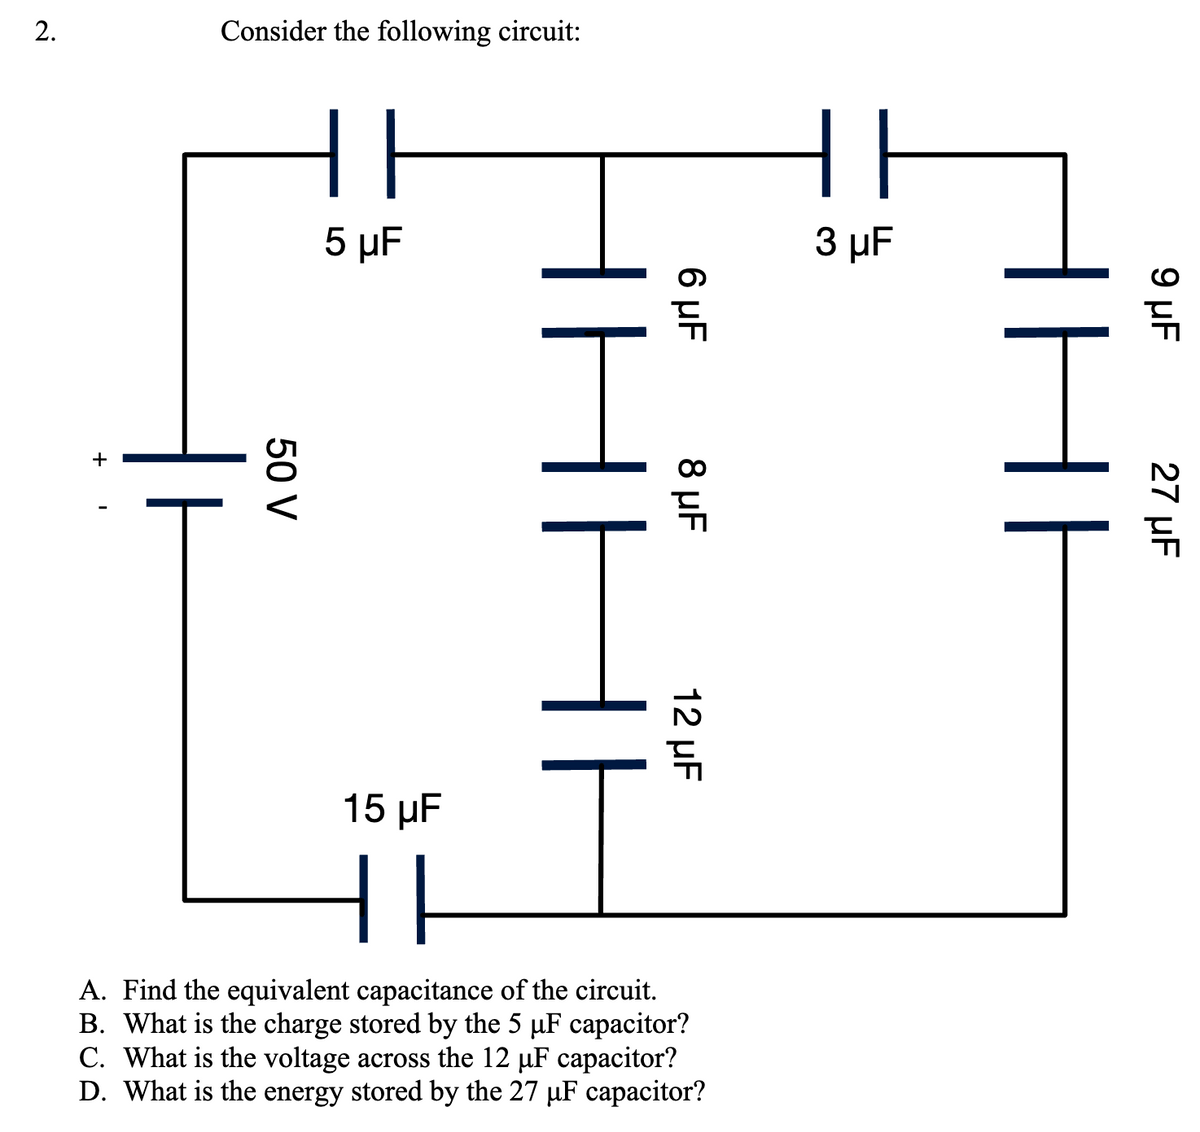 2.
Consider the following circuit:
50 V
|| F
5 μF
15 µF
||
T
6 μF
8 μF
12 µF
A. Find the equivalent capacitance of the circuit.
B. What is the charge stored by the 5 µF capacitor?
C. What is the voltage across the 12 µF capacitor?
D. What is the energy stored by the 27 µF capacitor?
F
3 μF
9 μF
27 µF